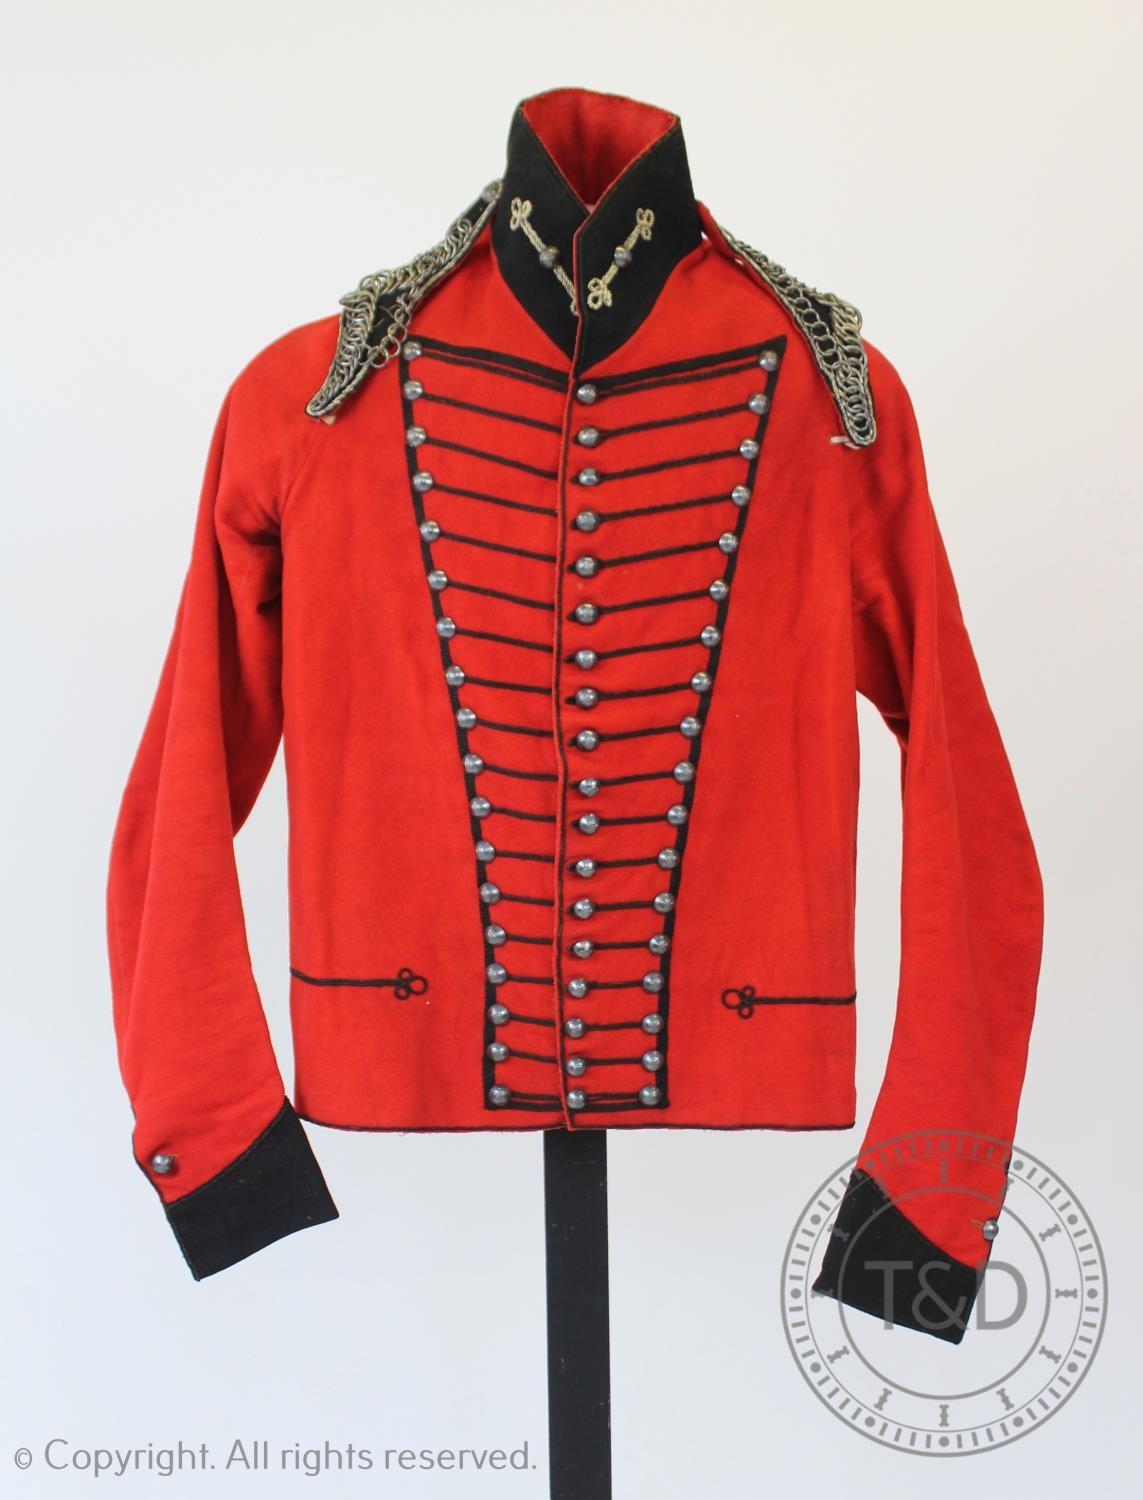 An early 20th century Cheshire Cavalry jacket and associated trousers, the jacket with navy braiding